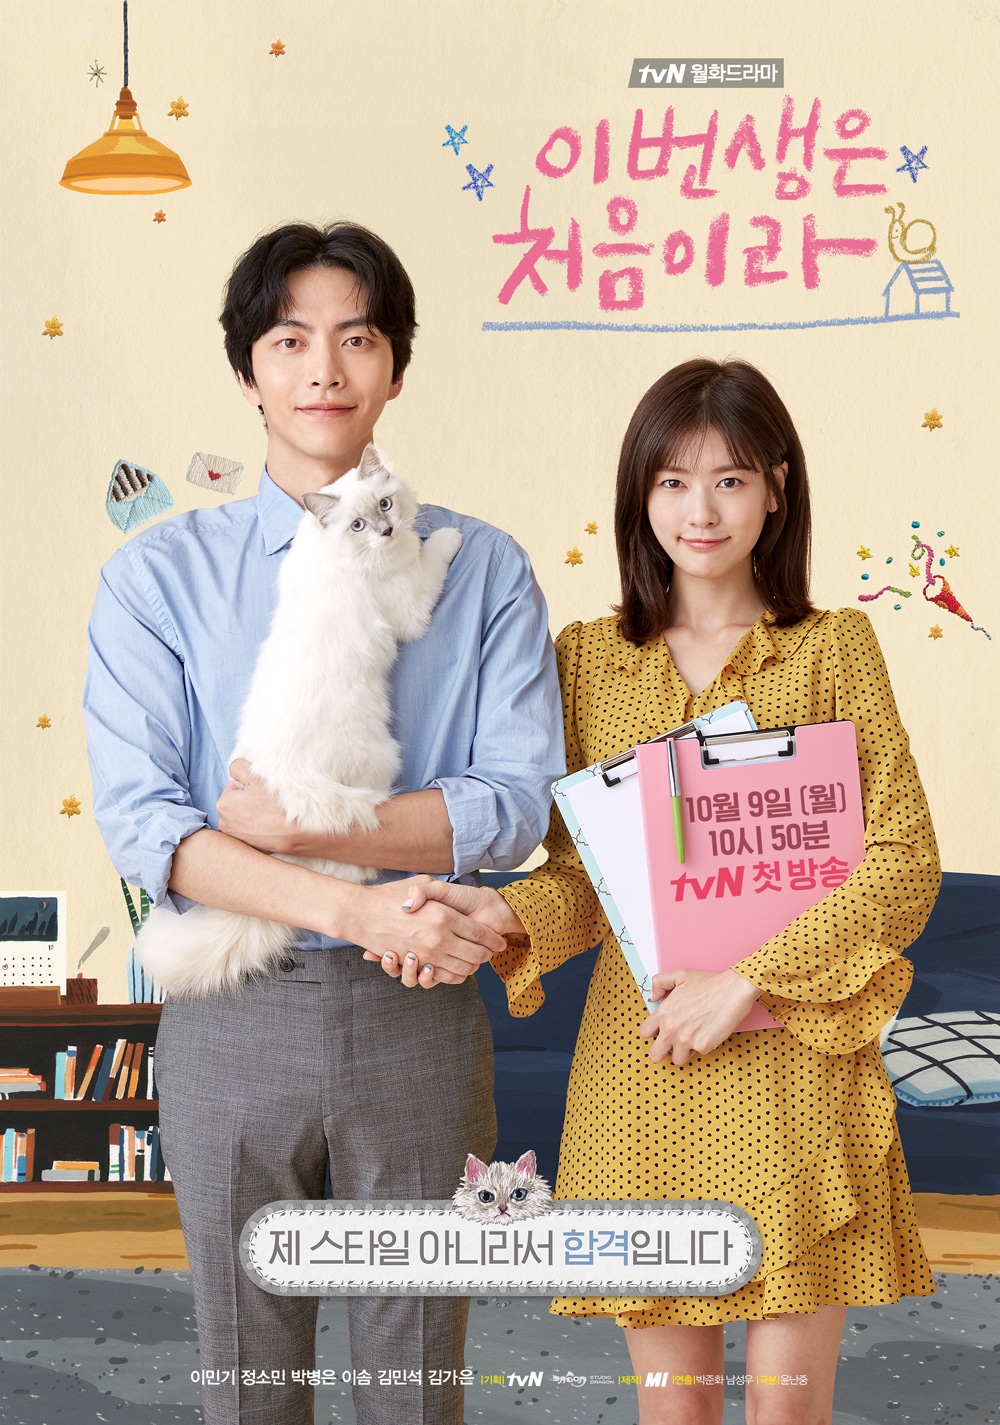 Nonton Drama Korea Because This Is My First Life (2017)